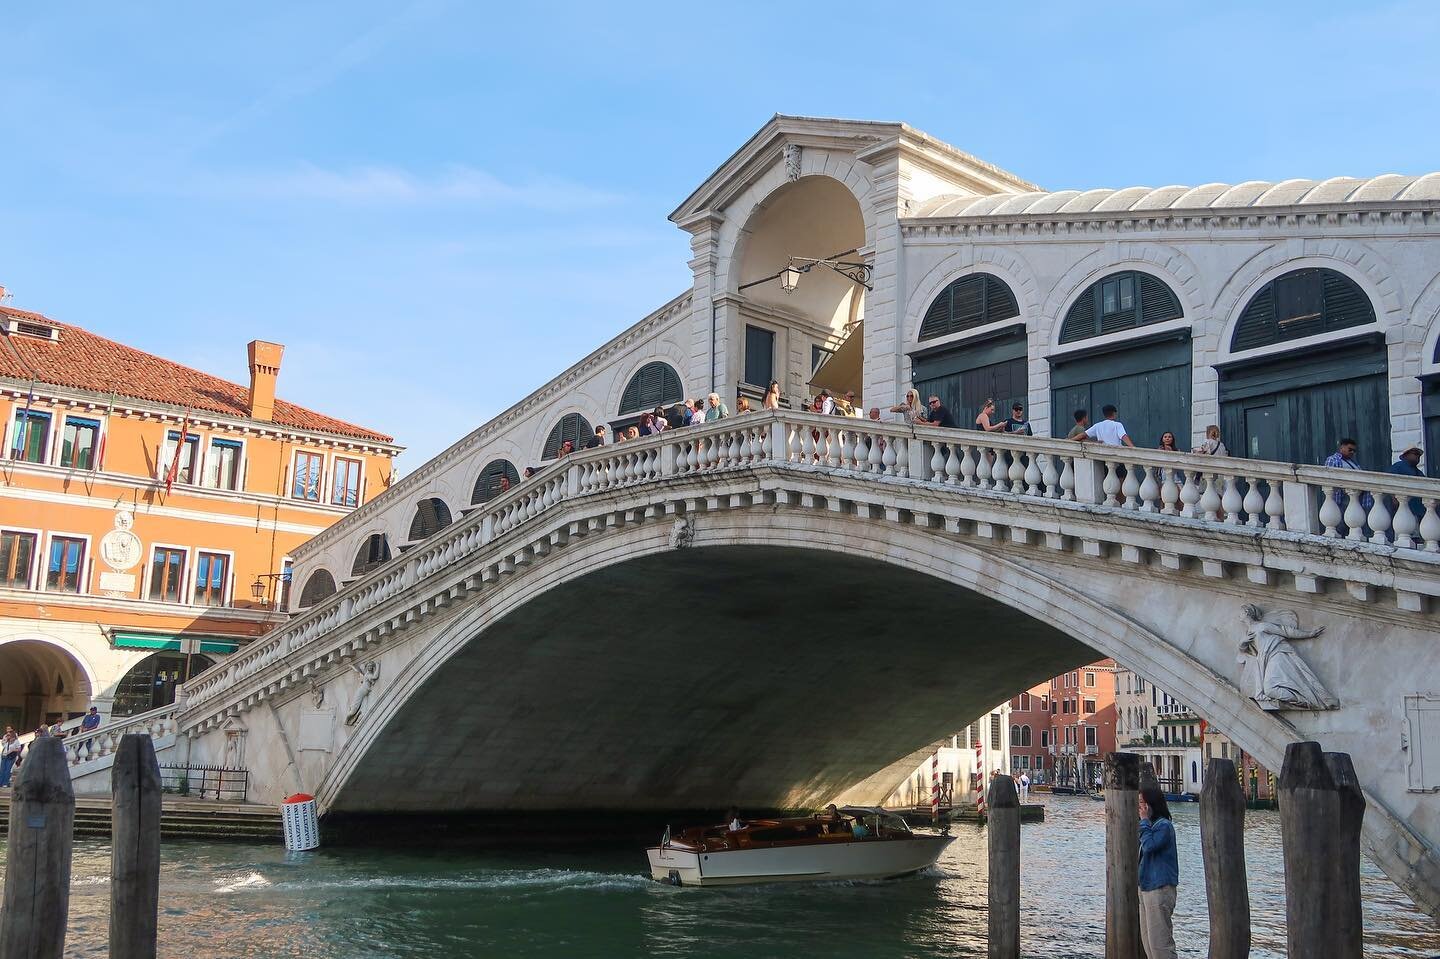 2023// Day 6 of our adventure and our first full day in Venice! We started at the Rialto Bridge and then made our way over to St Marks Square &amp; the Doge Palace. 
#AlidiaEuro2023 #venice #italy #rialtobridge #globetrekkinggeek #alidiatraveladventu